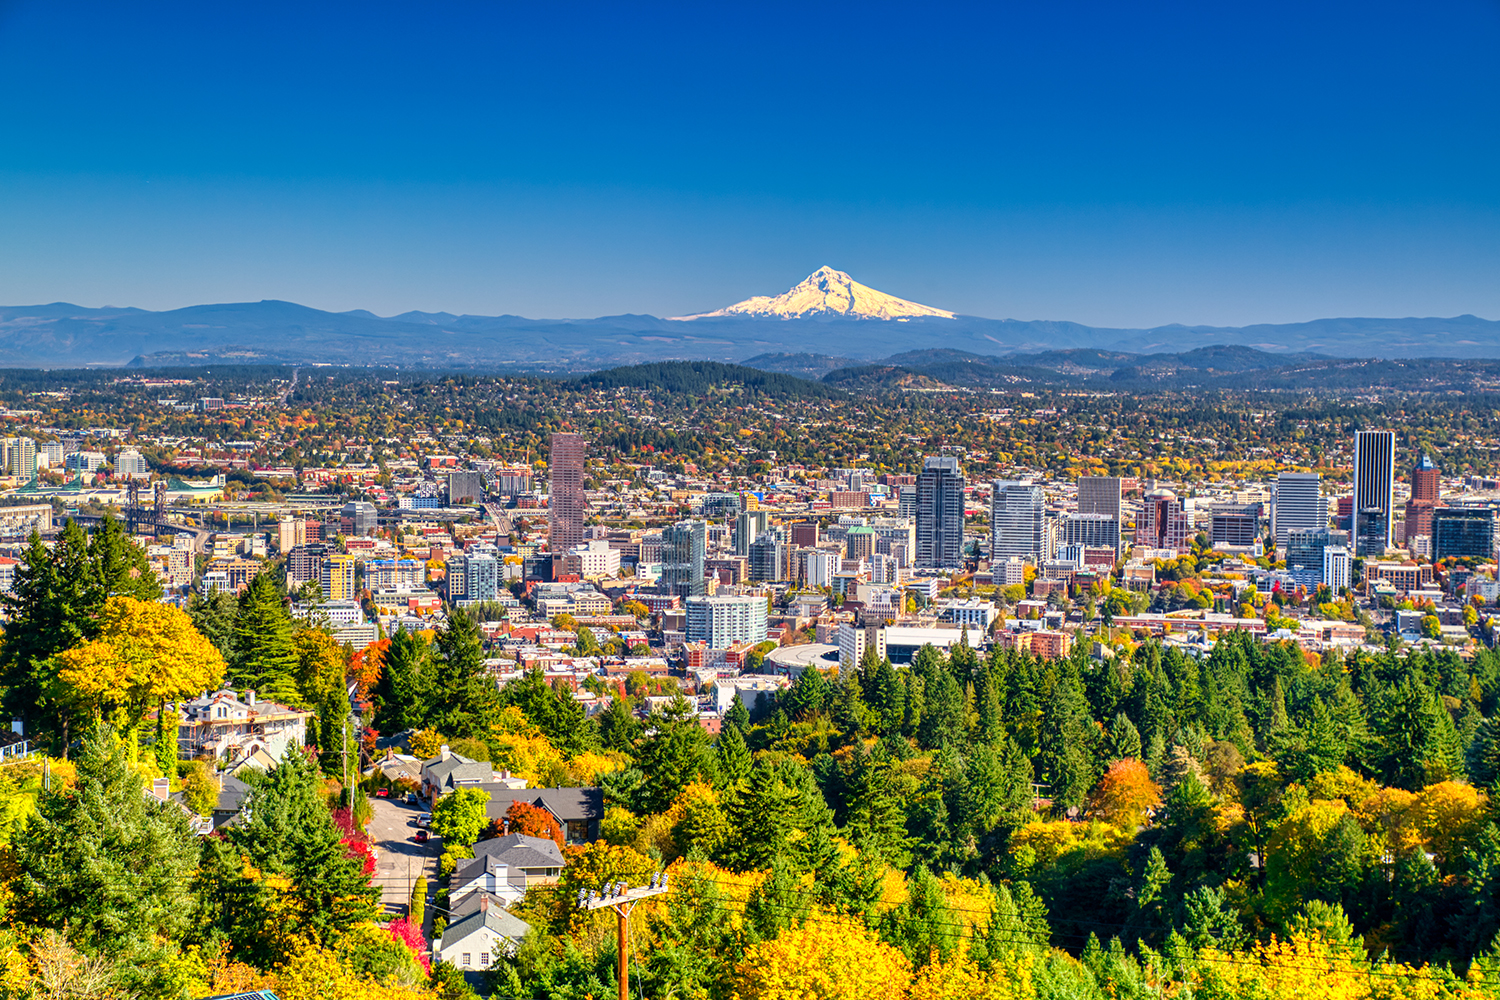 Portland Travel Guide: Where to Stay, What to Eat, and More - The Manual